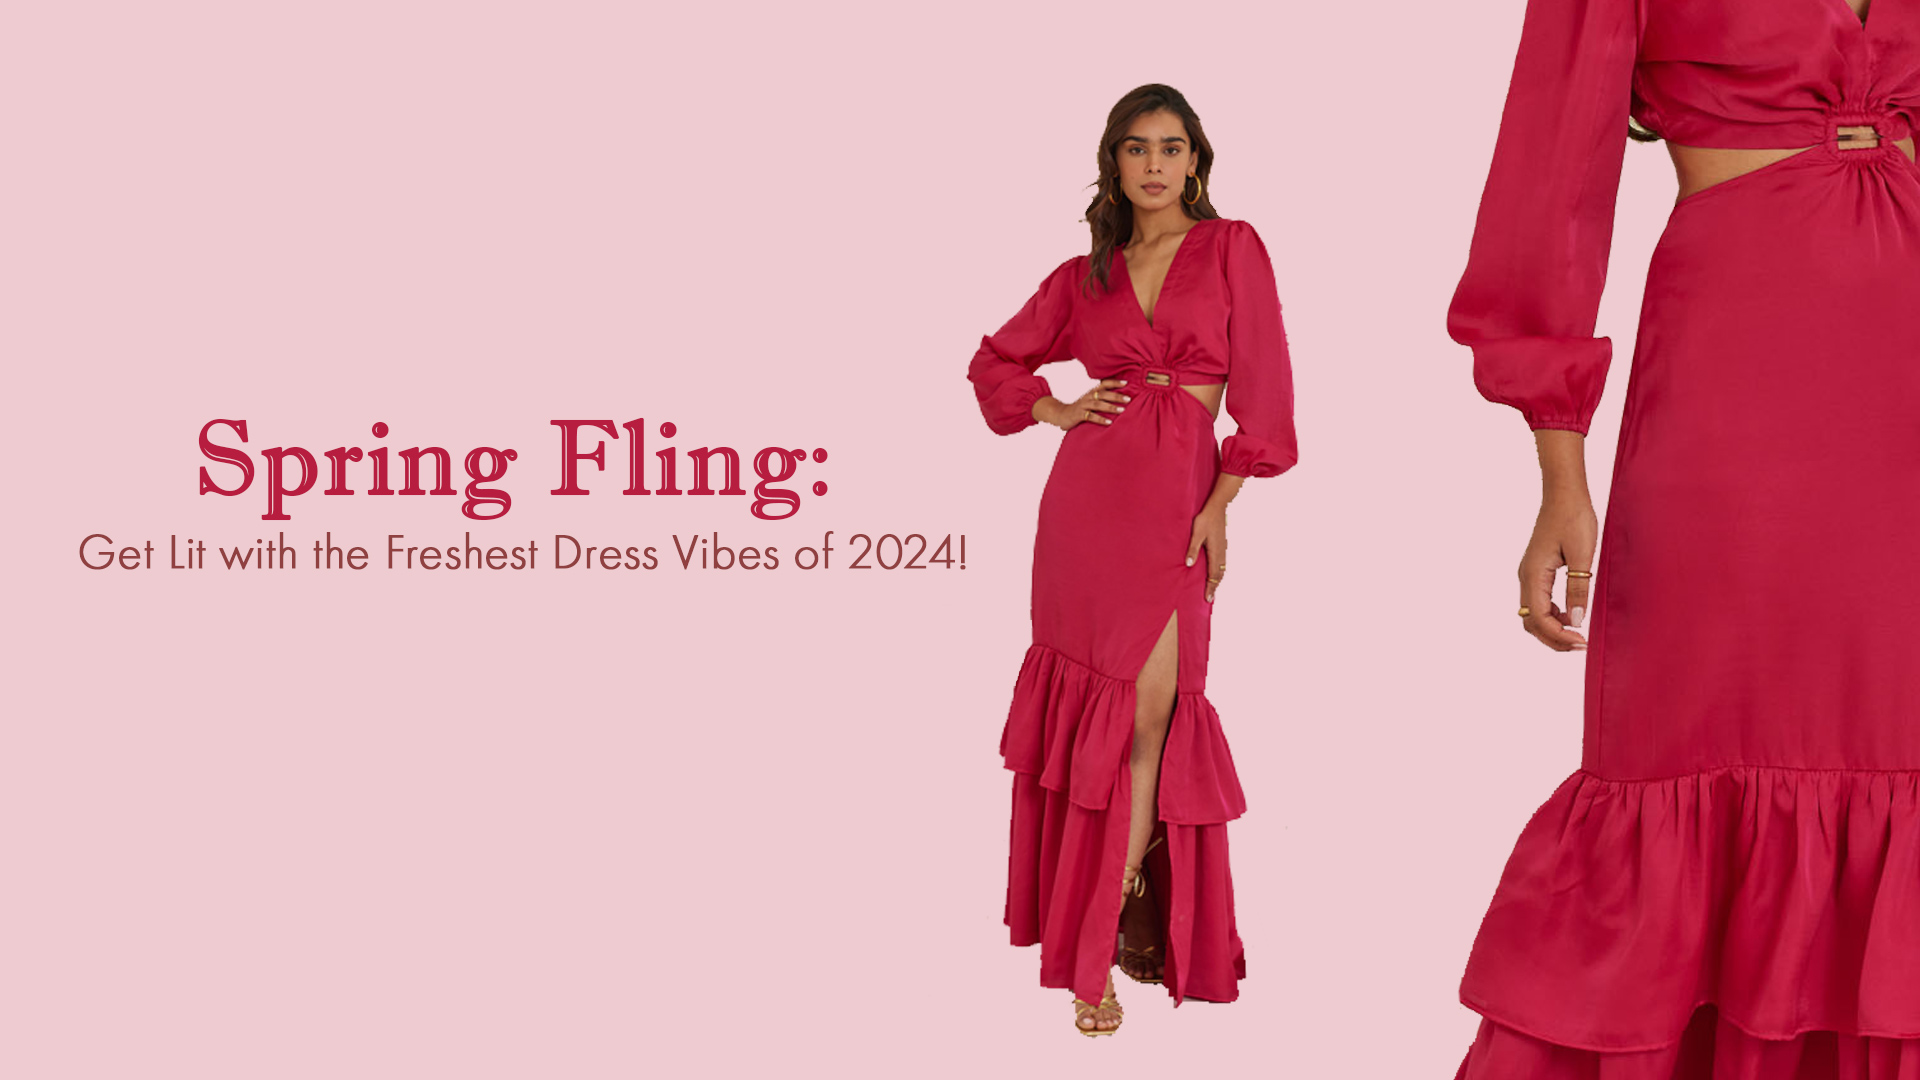 Spring Fling: Get Lit with the Freshest Dress Vibes of 2024!